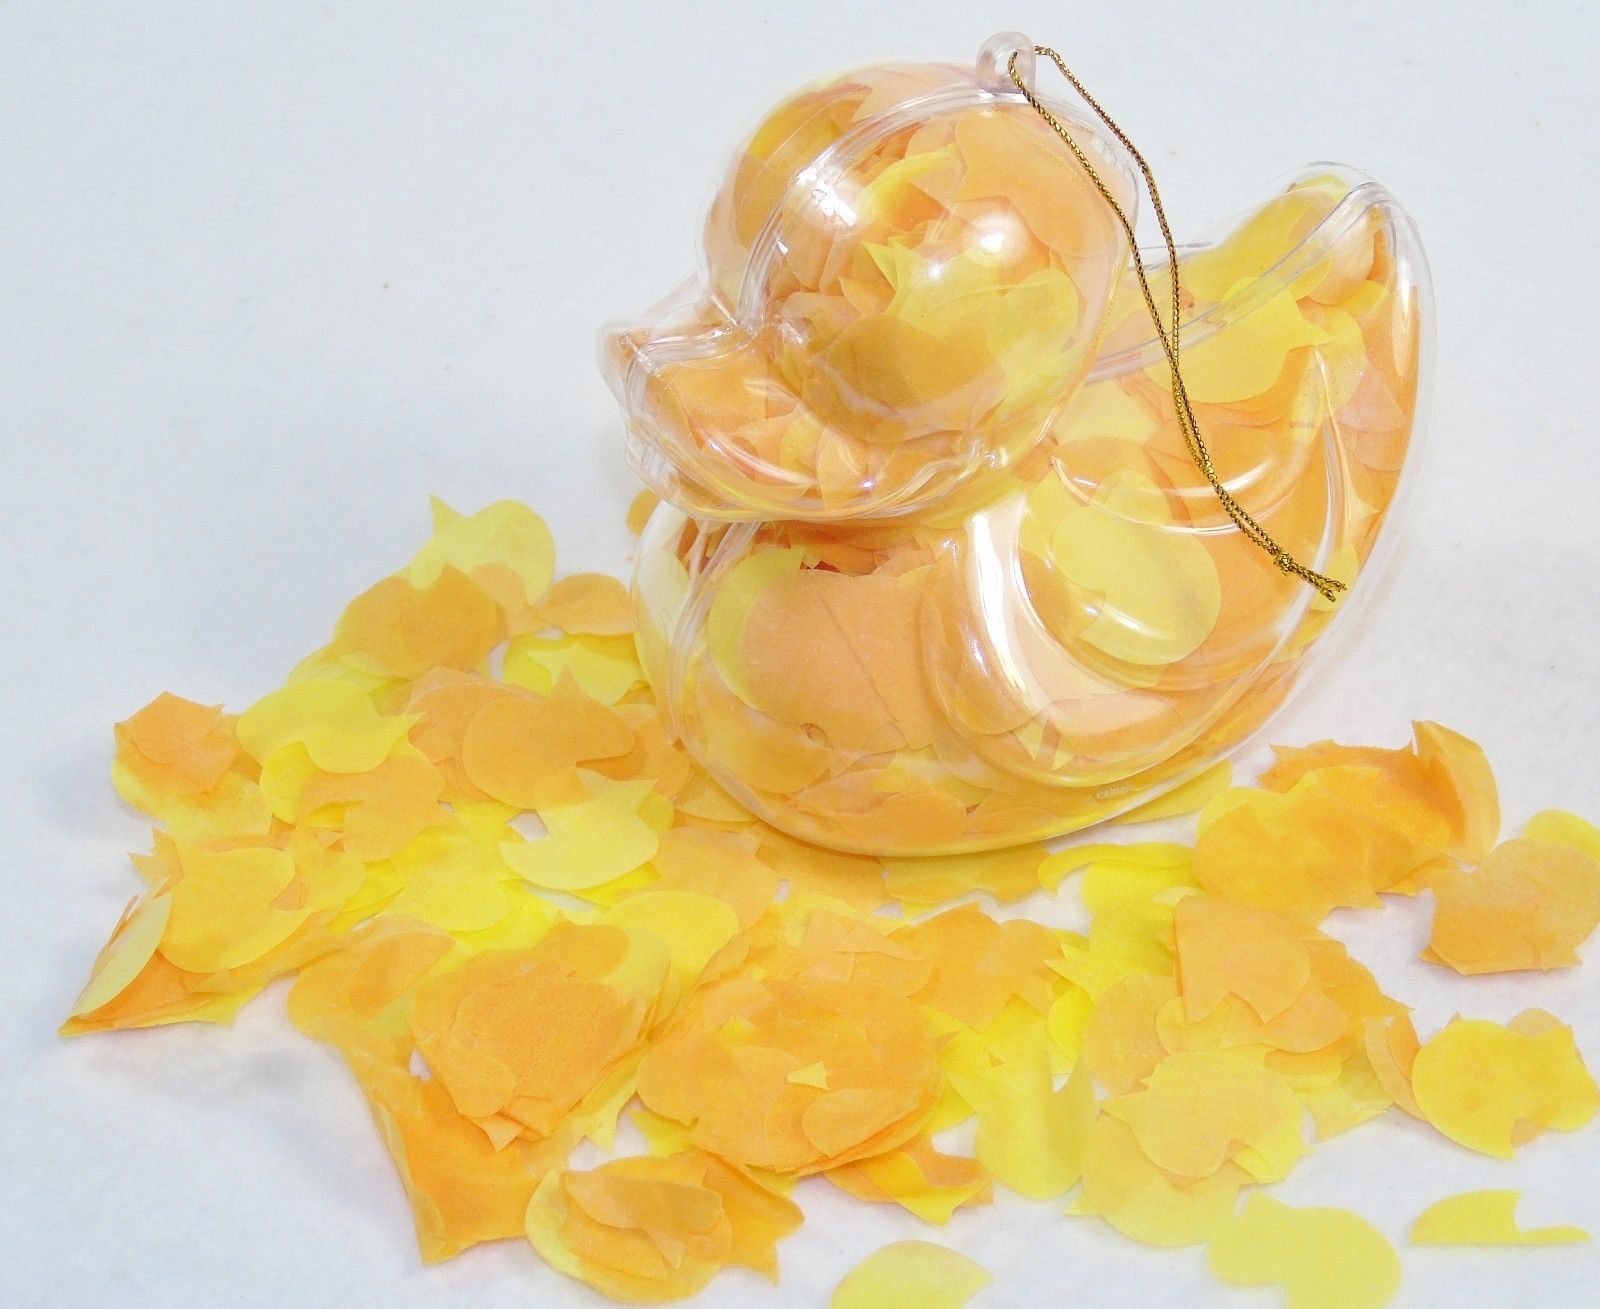 Bath Confetti In Duck-Shaped Acetate Ornament ~ Flower Scent, Duck-Shaped Flakes - $9.75